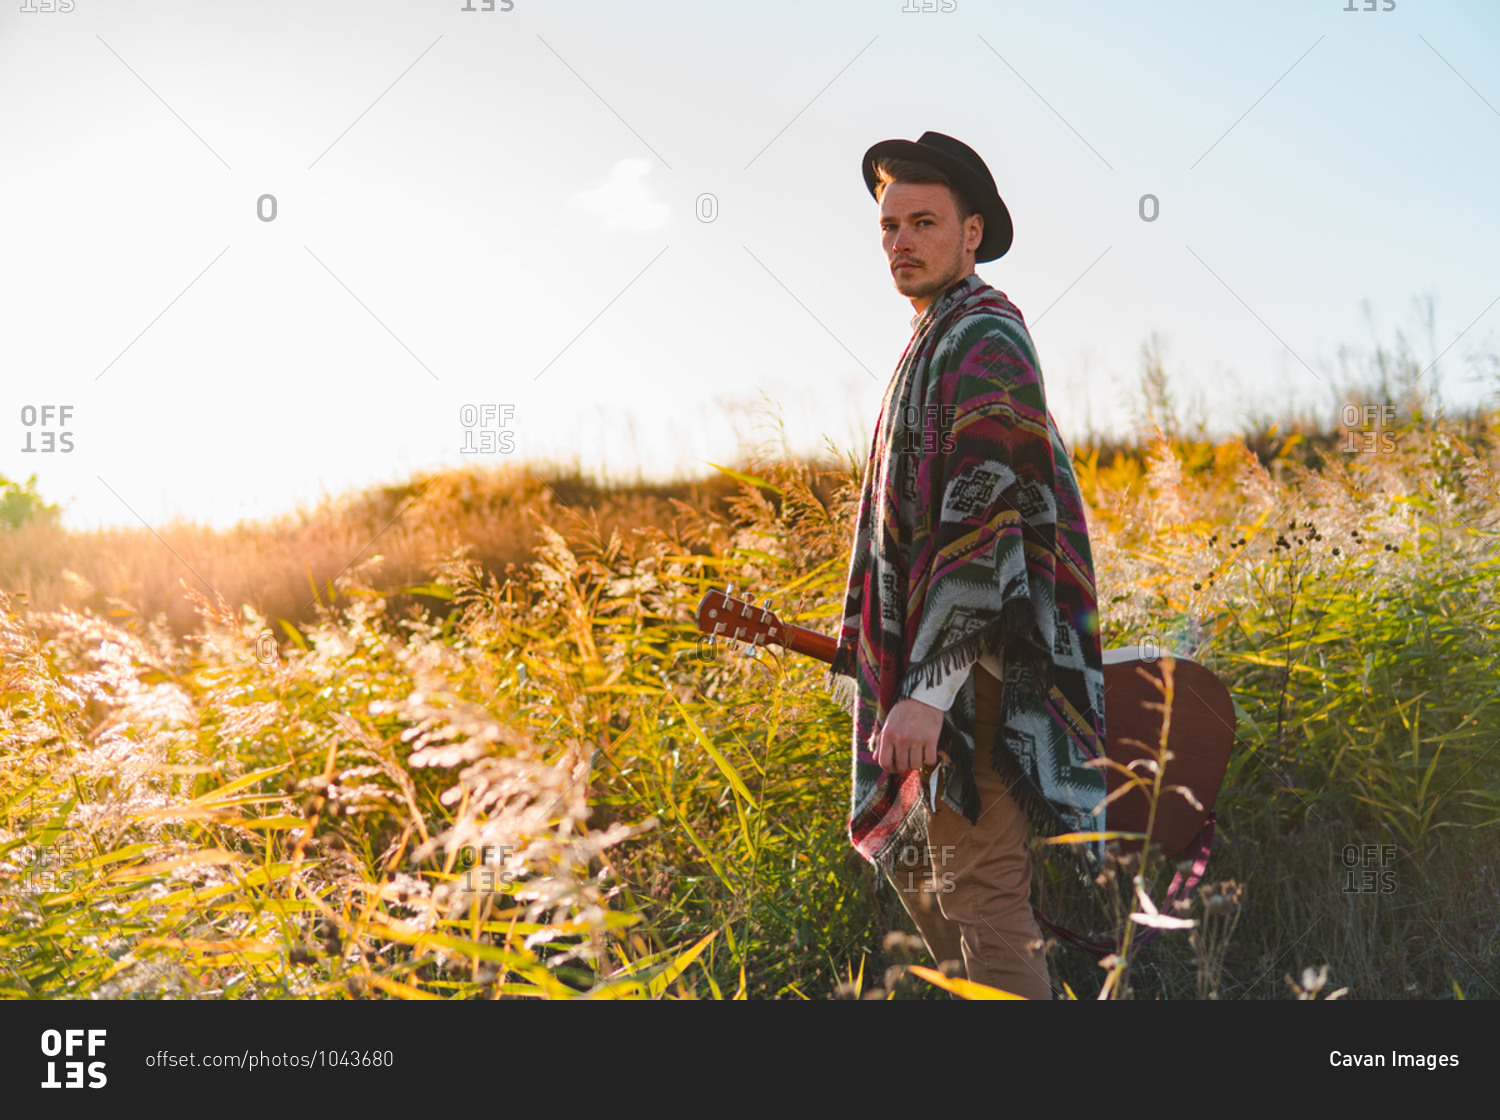 Folk musician with acoustic guitar posing in poncho in rural area